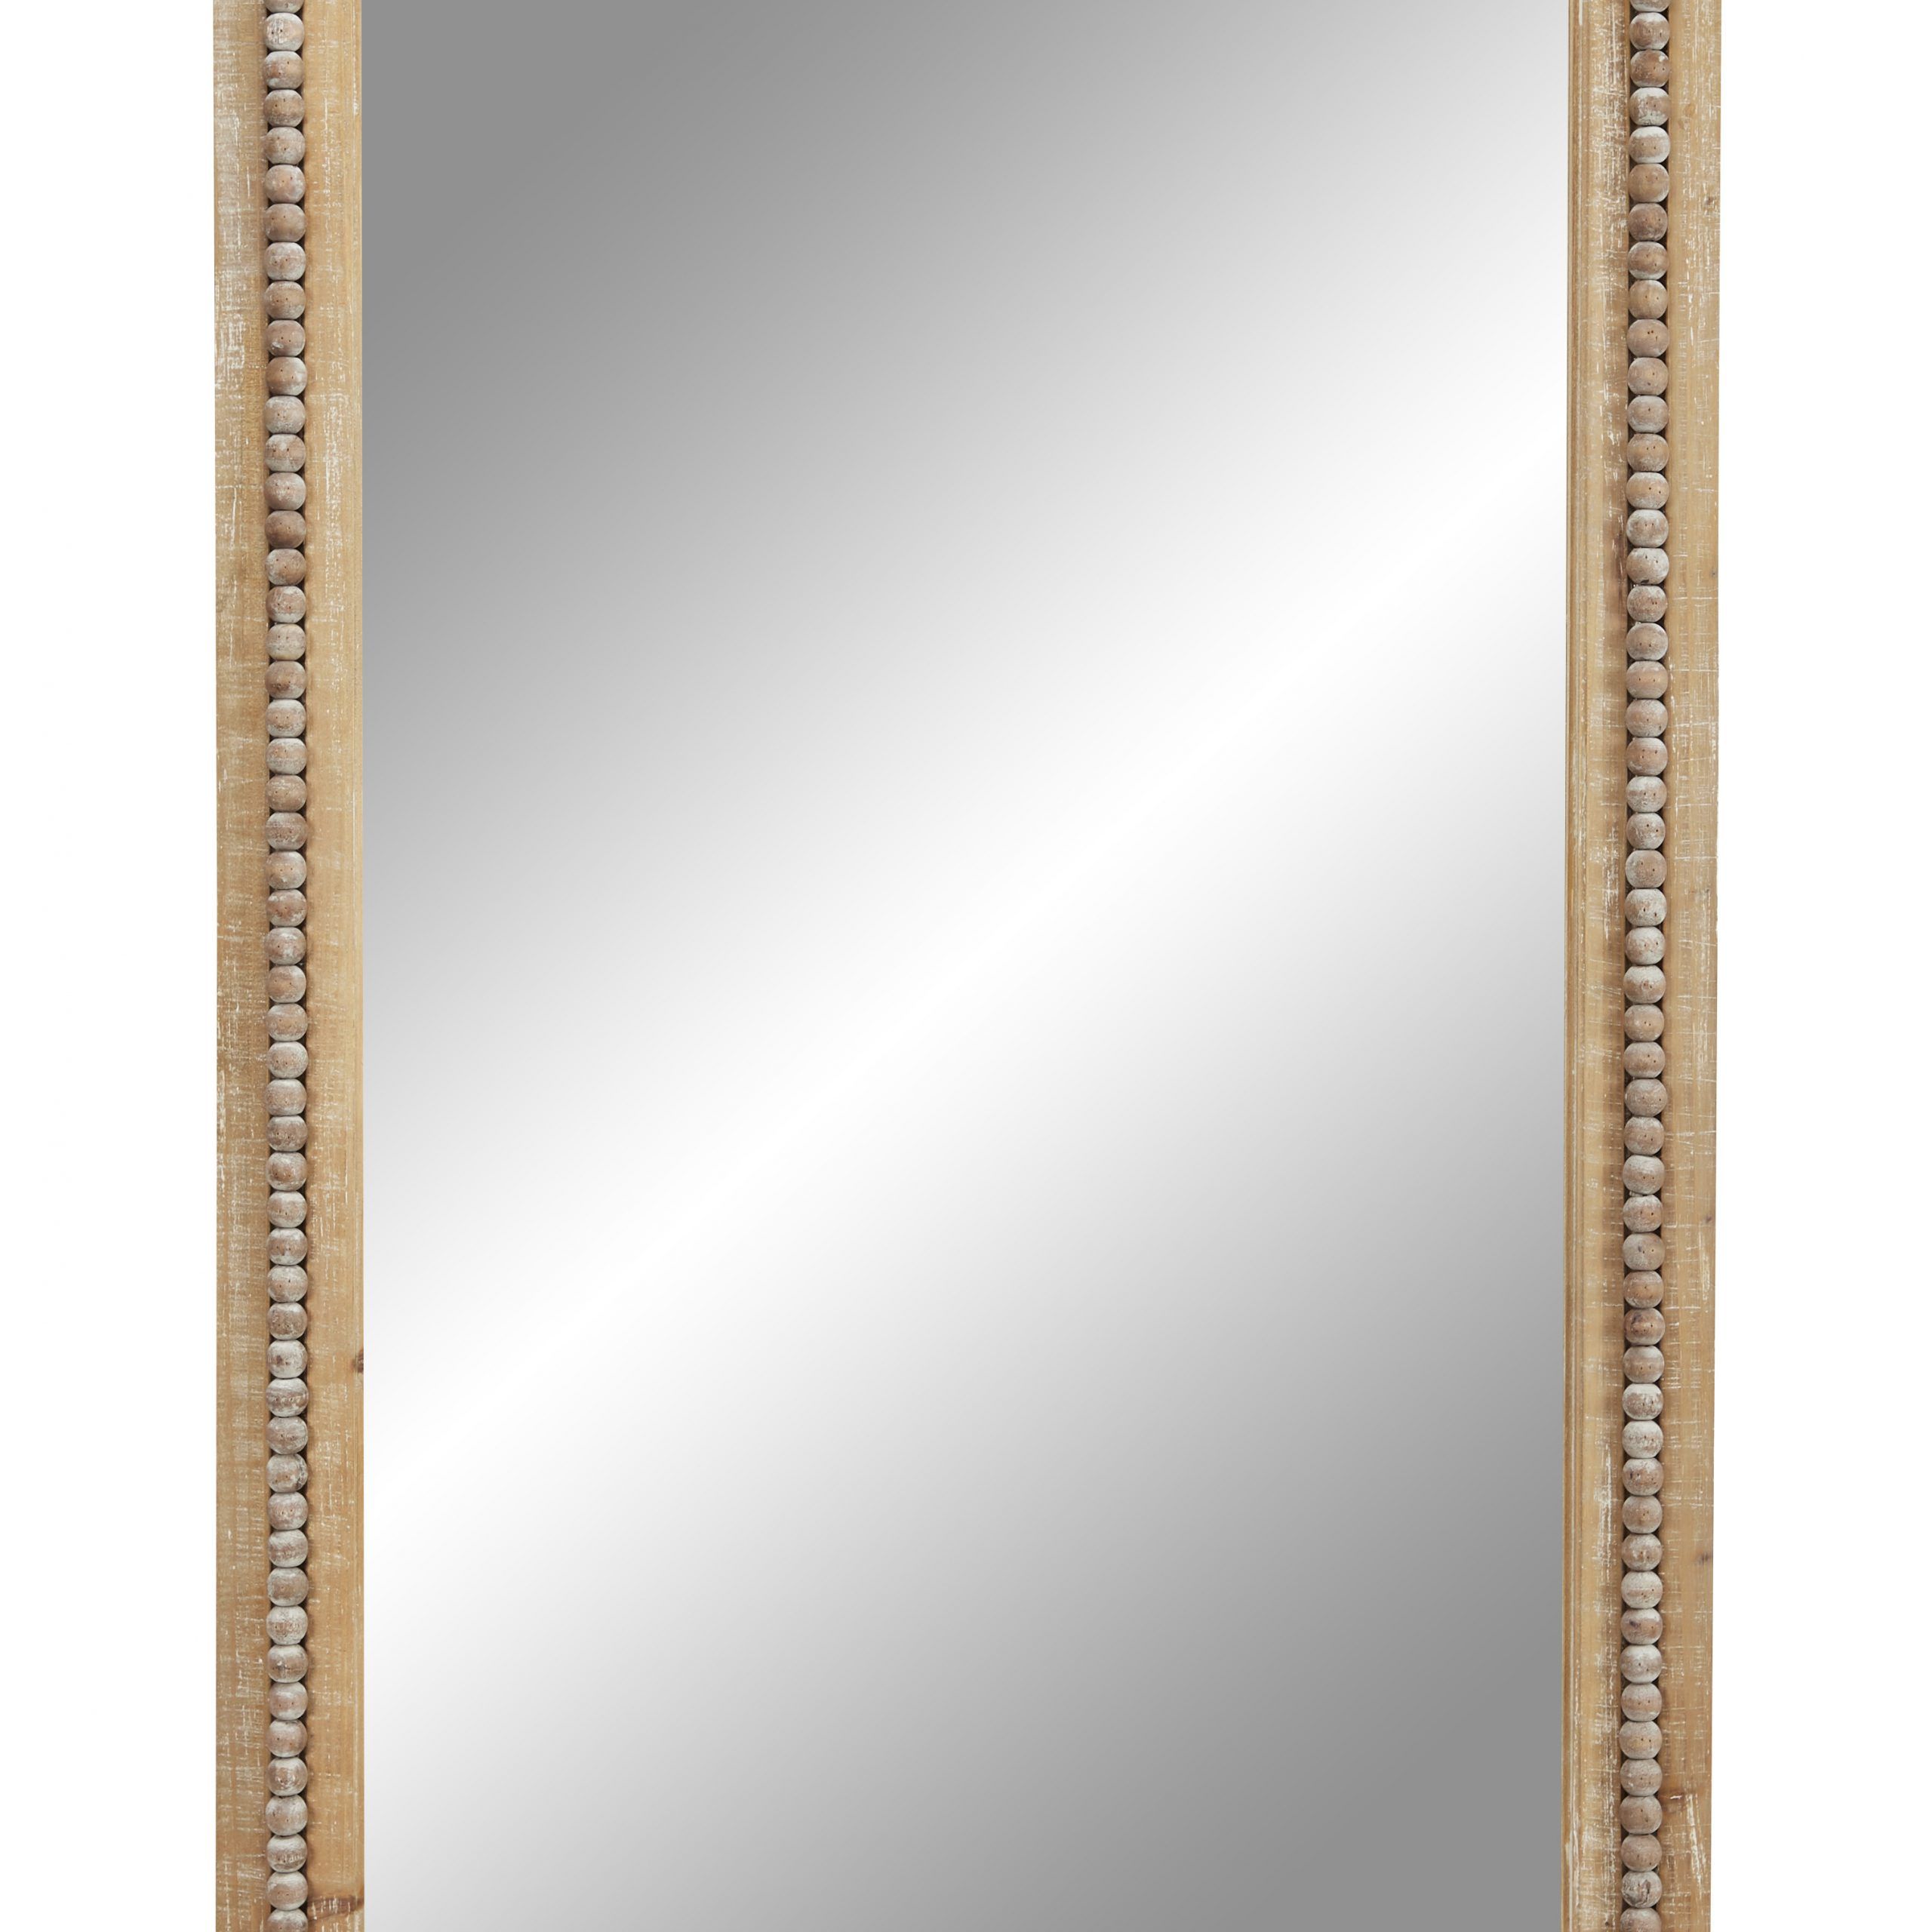 Decmode Large Rectangular Whitewashed Wood Wall Mirror W/ Decorative Throughout Bracelet Traditional Accent Mirrors (View 11 of 15)